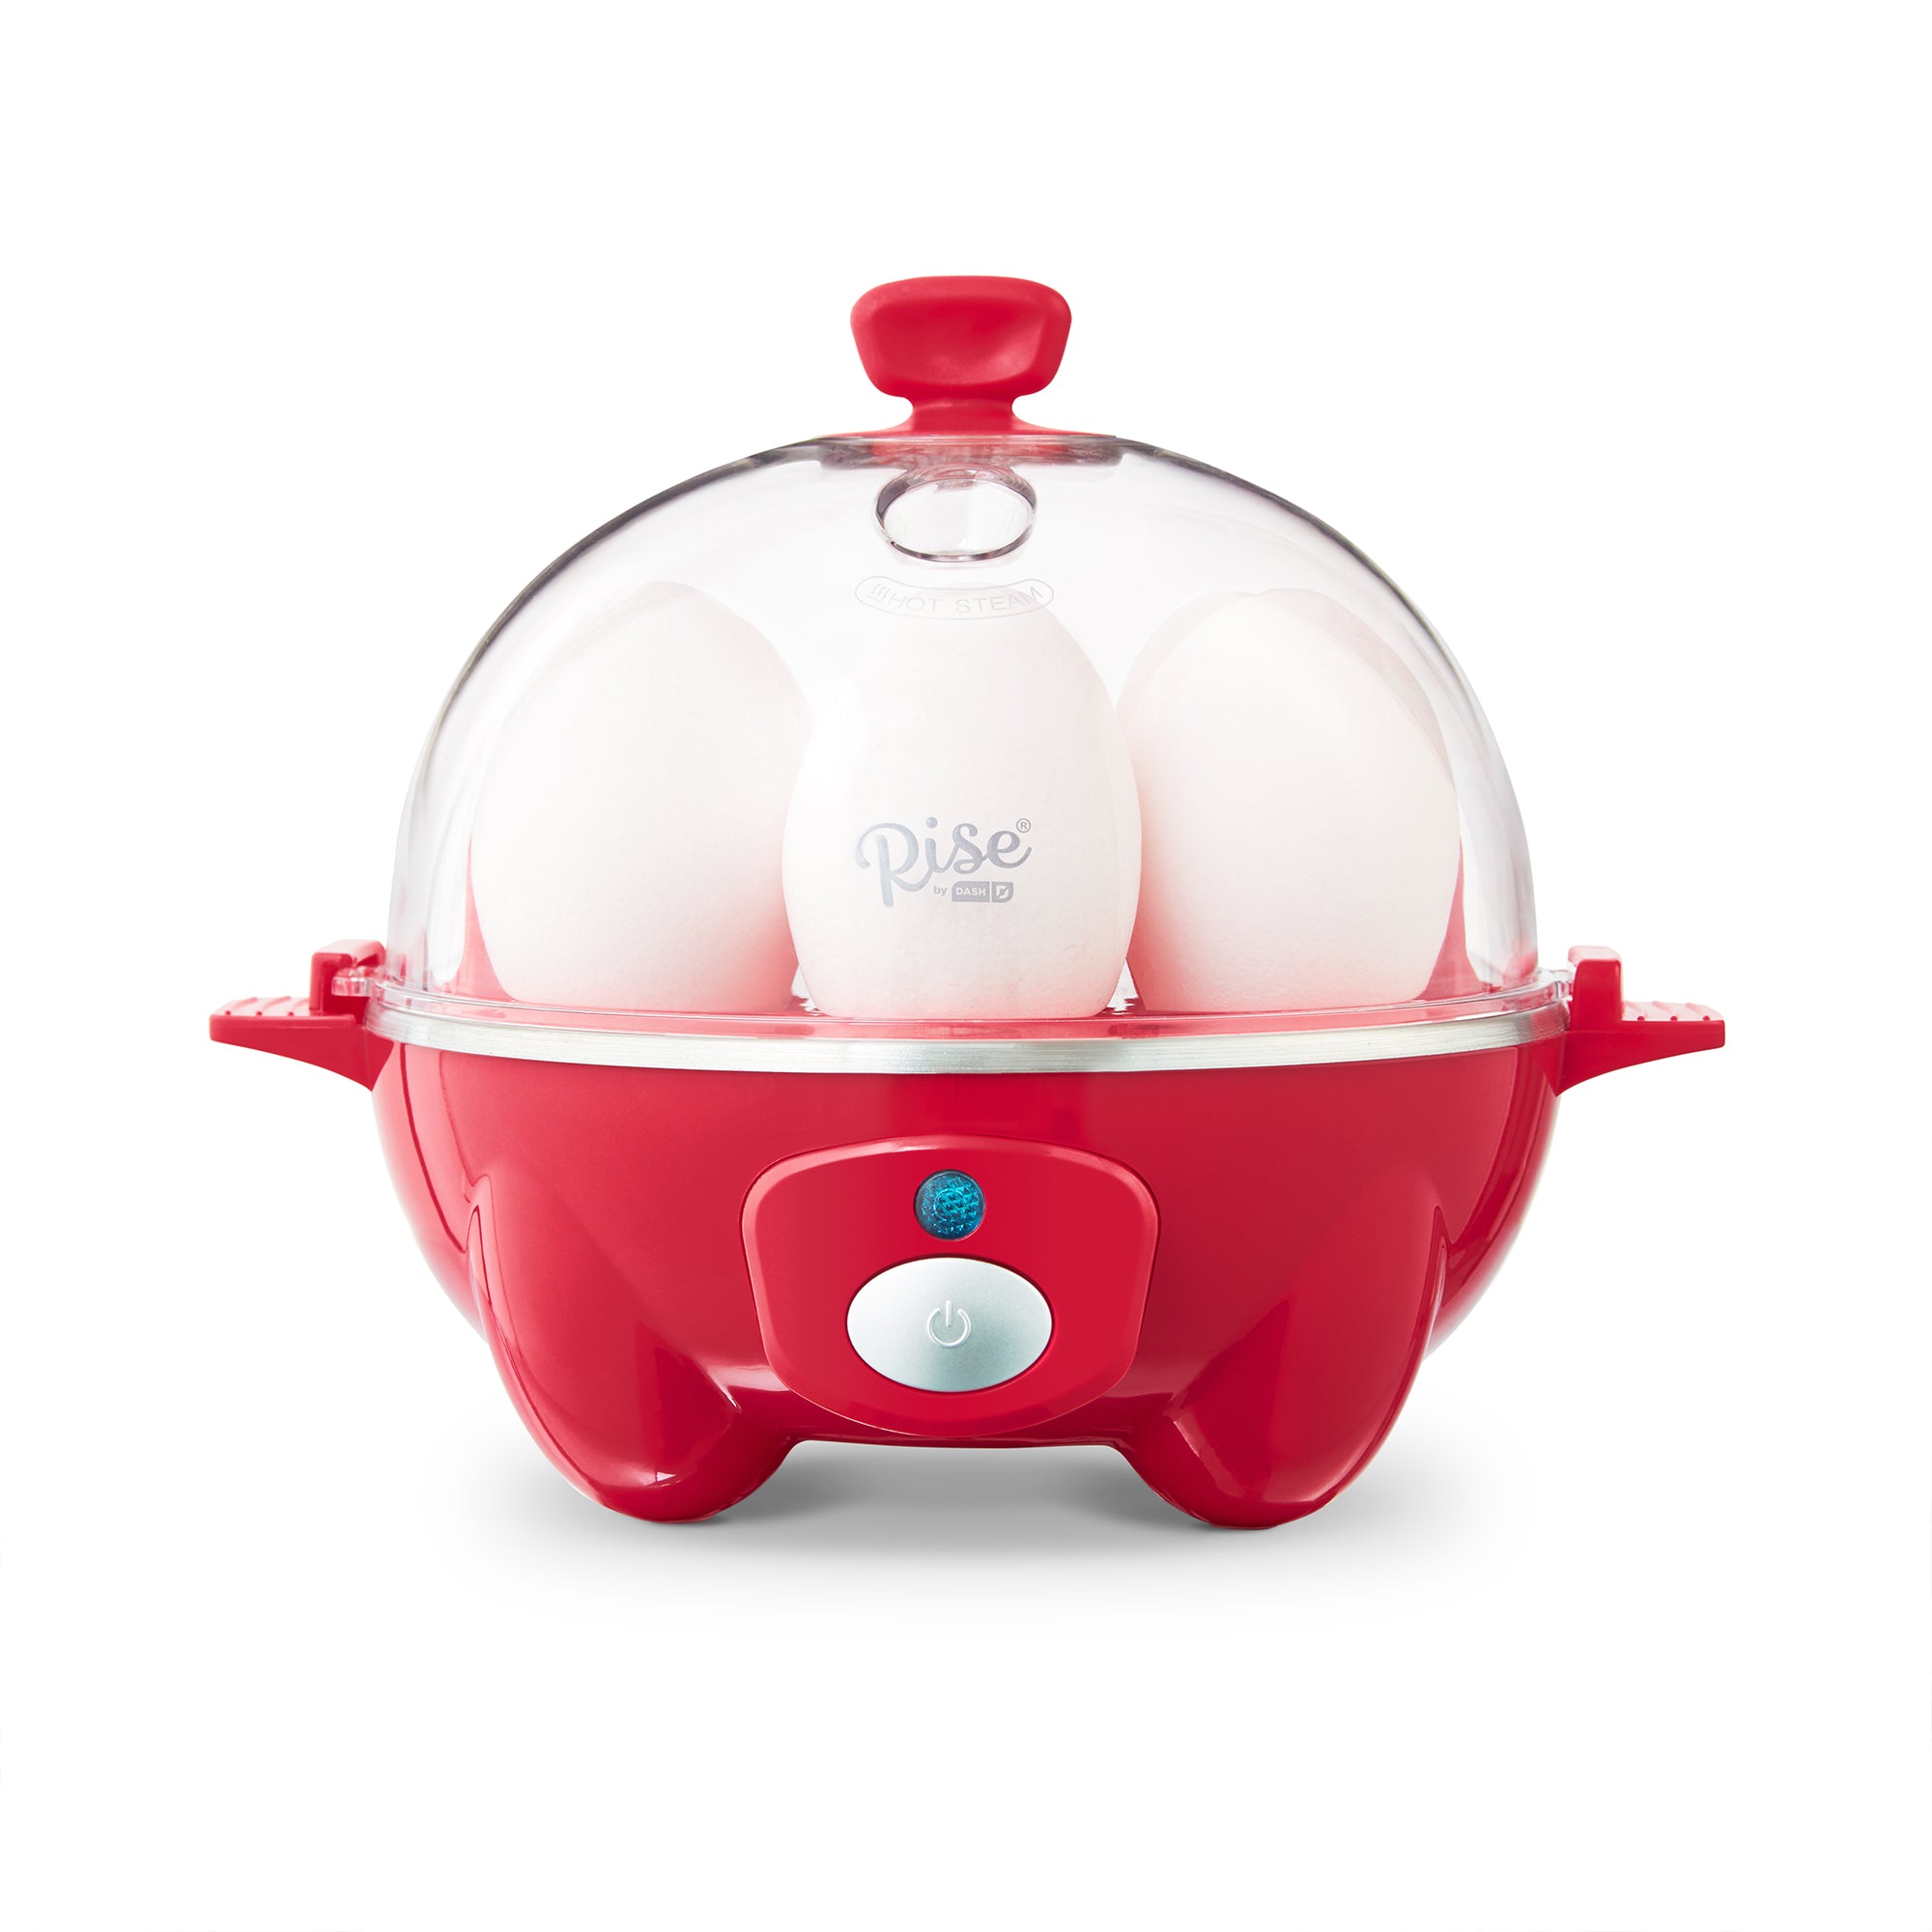 Rise by Dash Egg Cooker